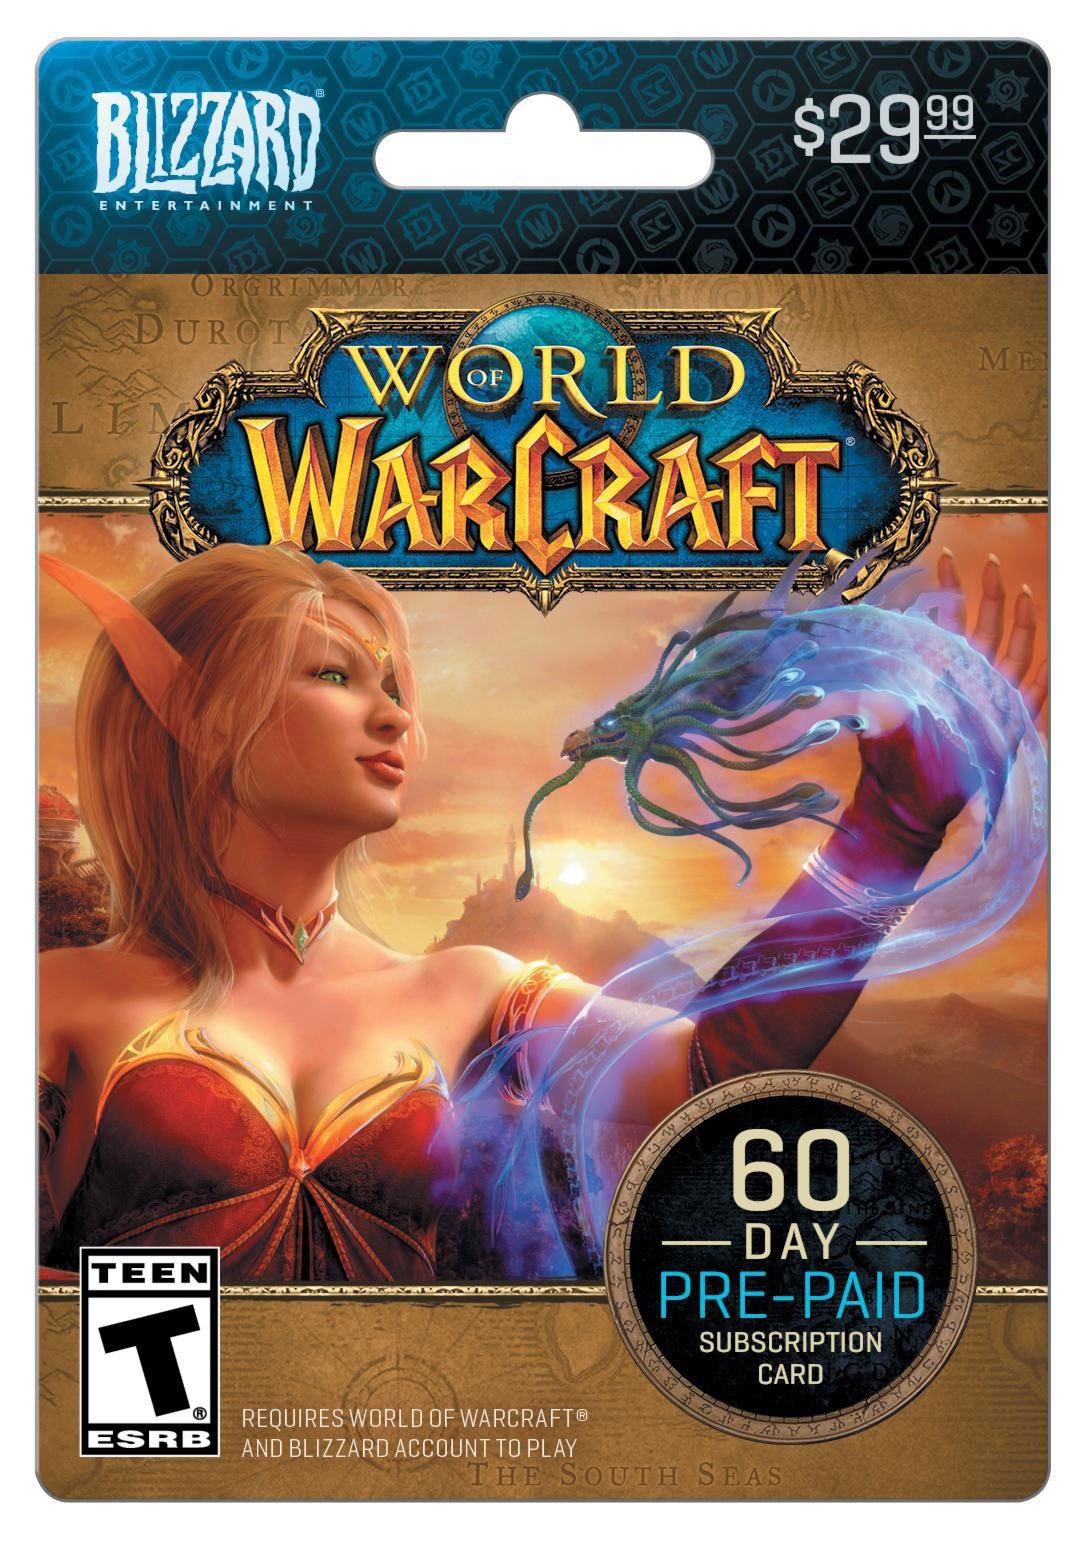 World of Warcraft 60 Day Pre-Paid Subscription Card